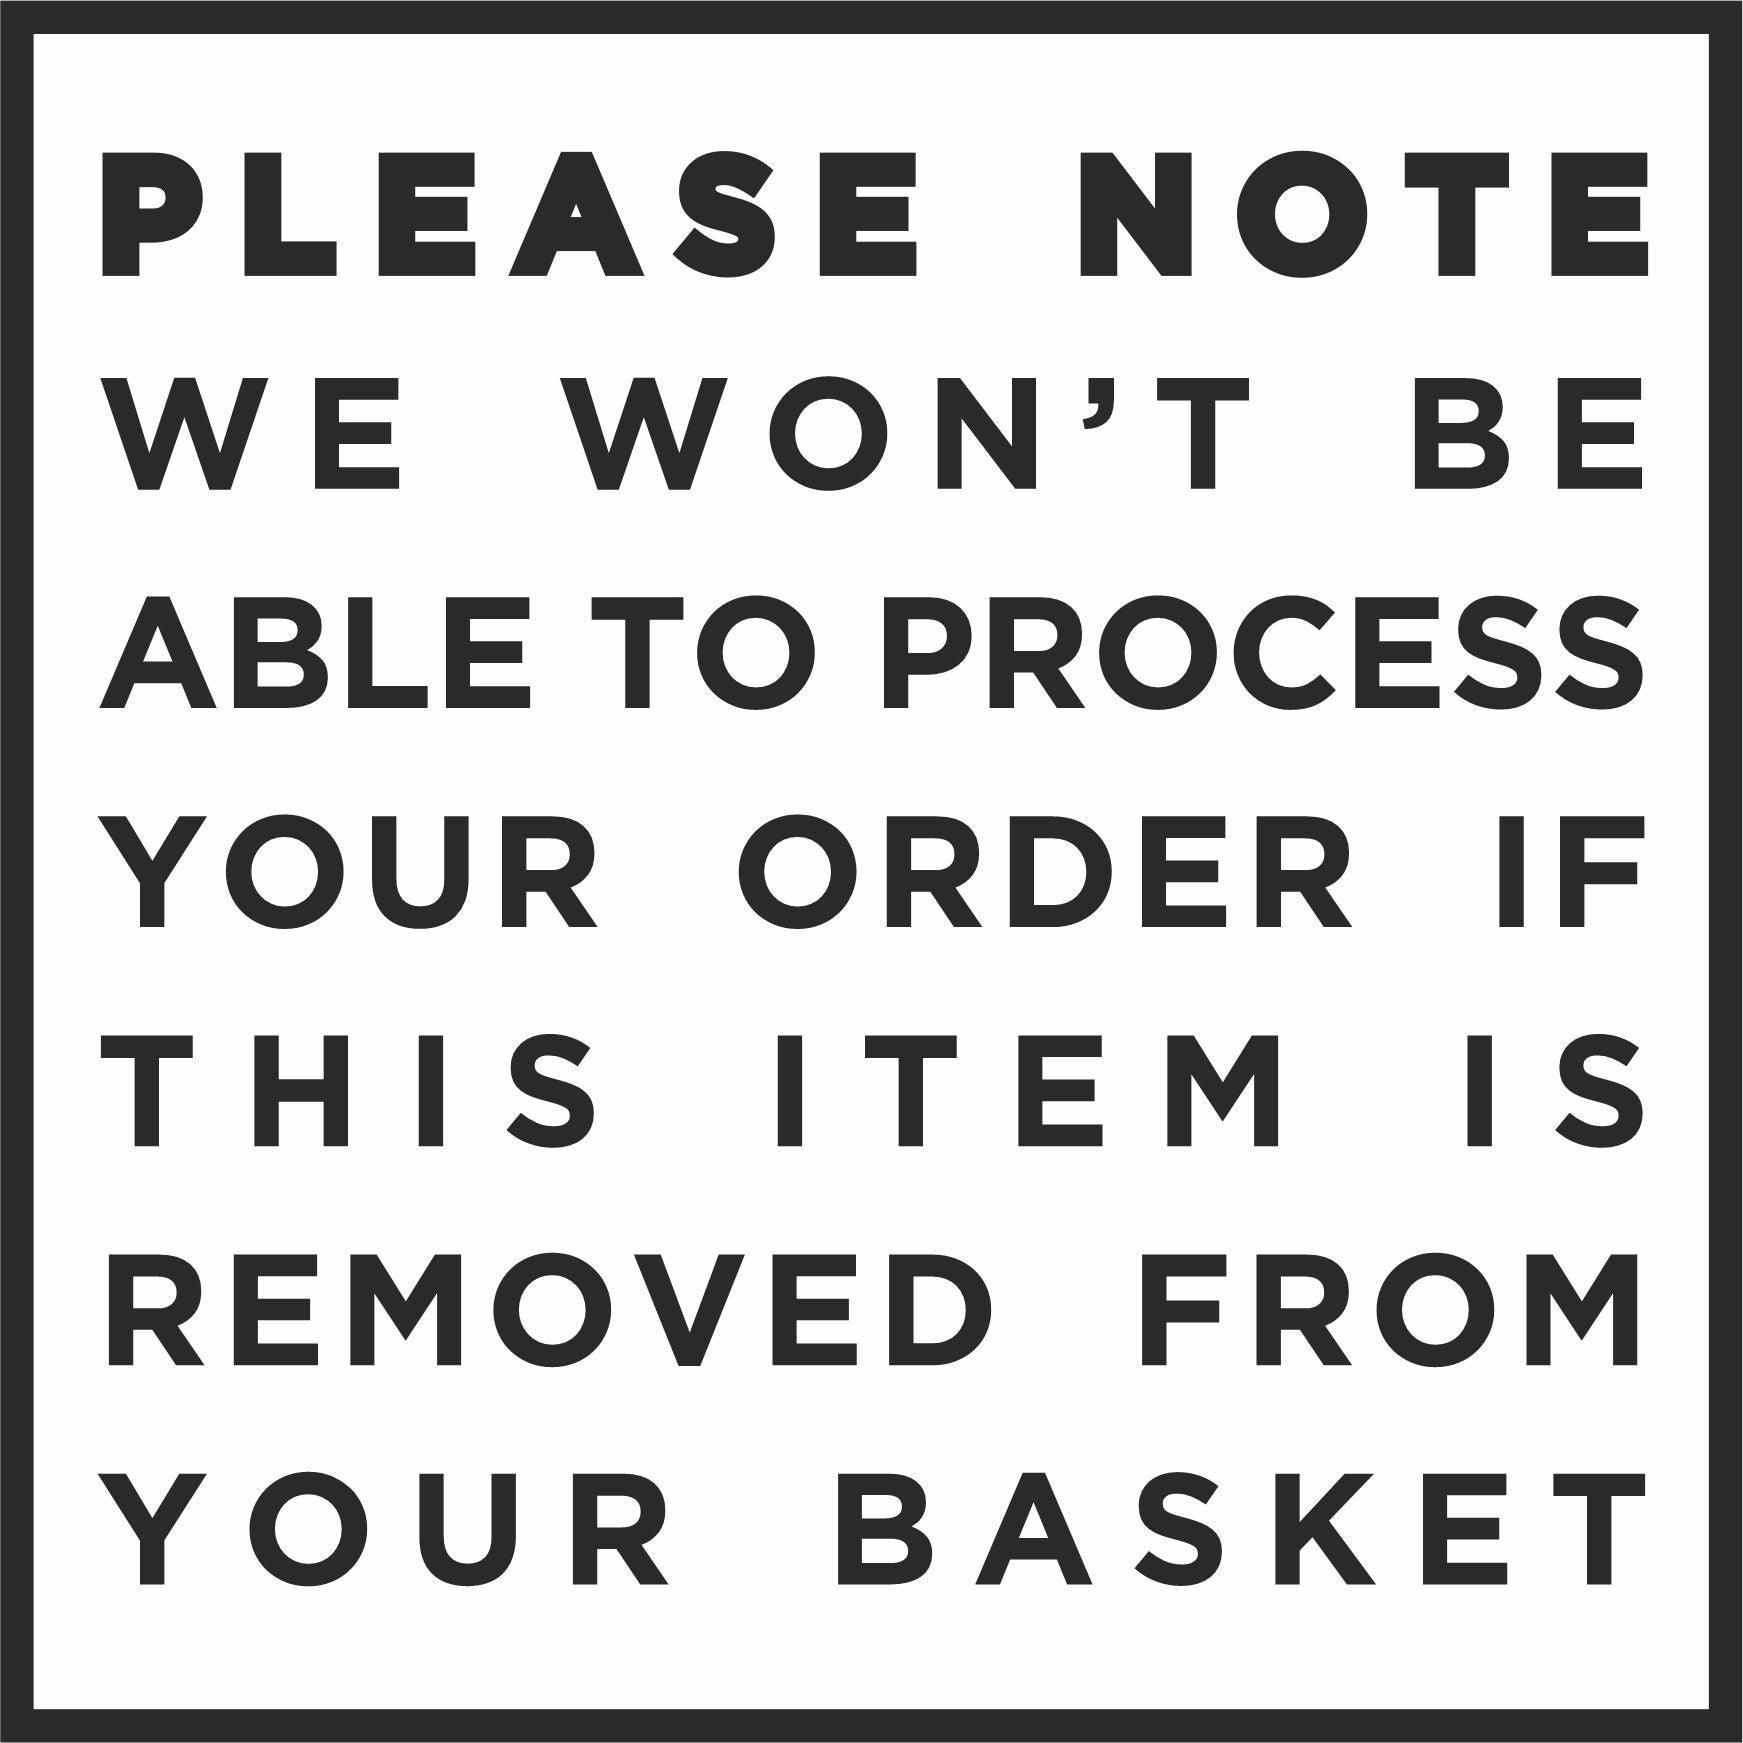 '+9 Custom Herb & Spice Pantry Labels (Add on - 18 Total) DO NOT REMOVE FROM BASKET Home Organisation